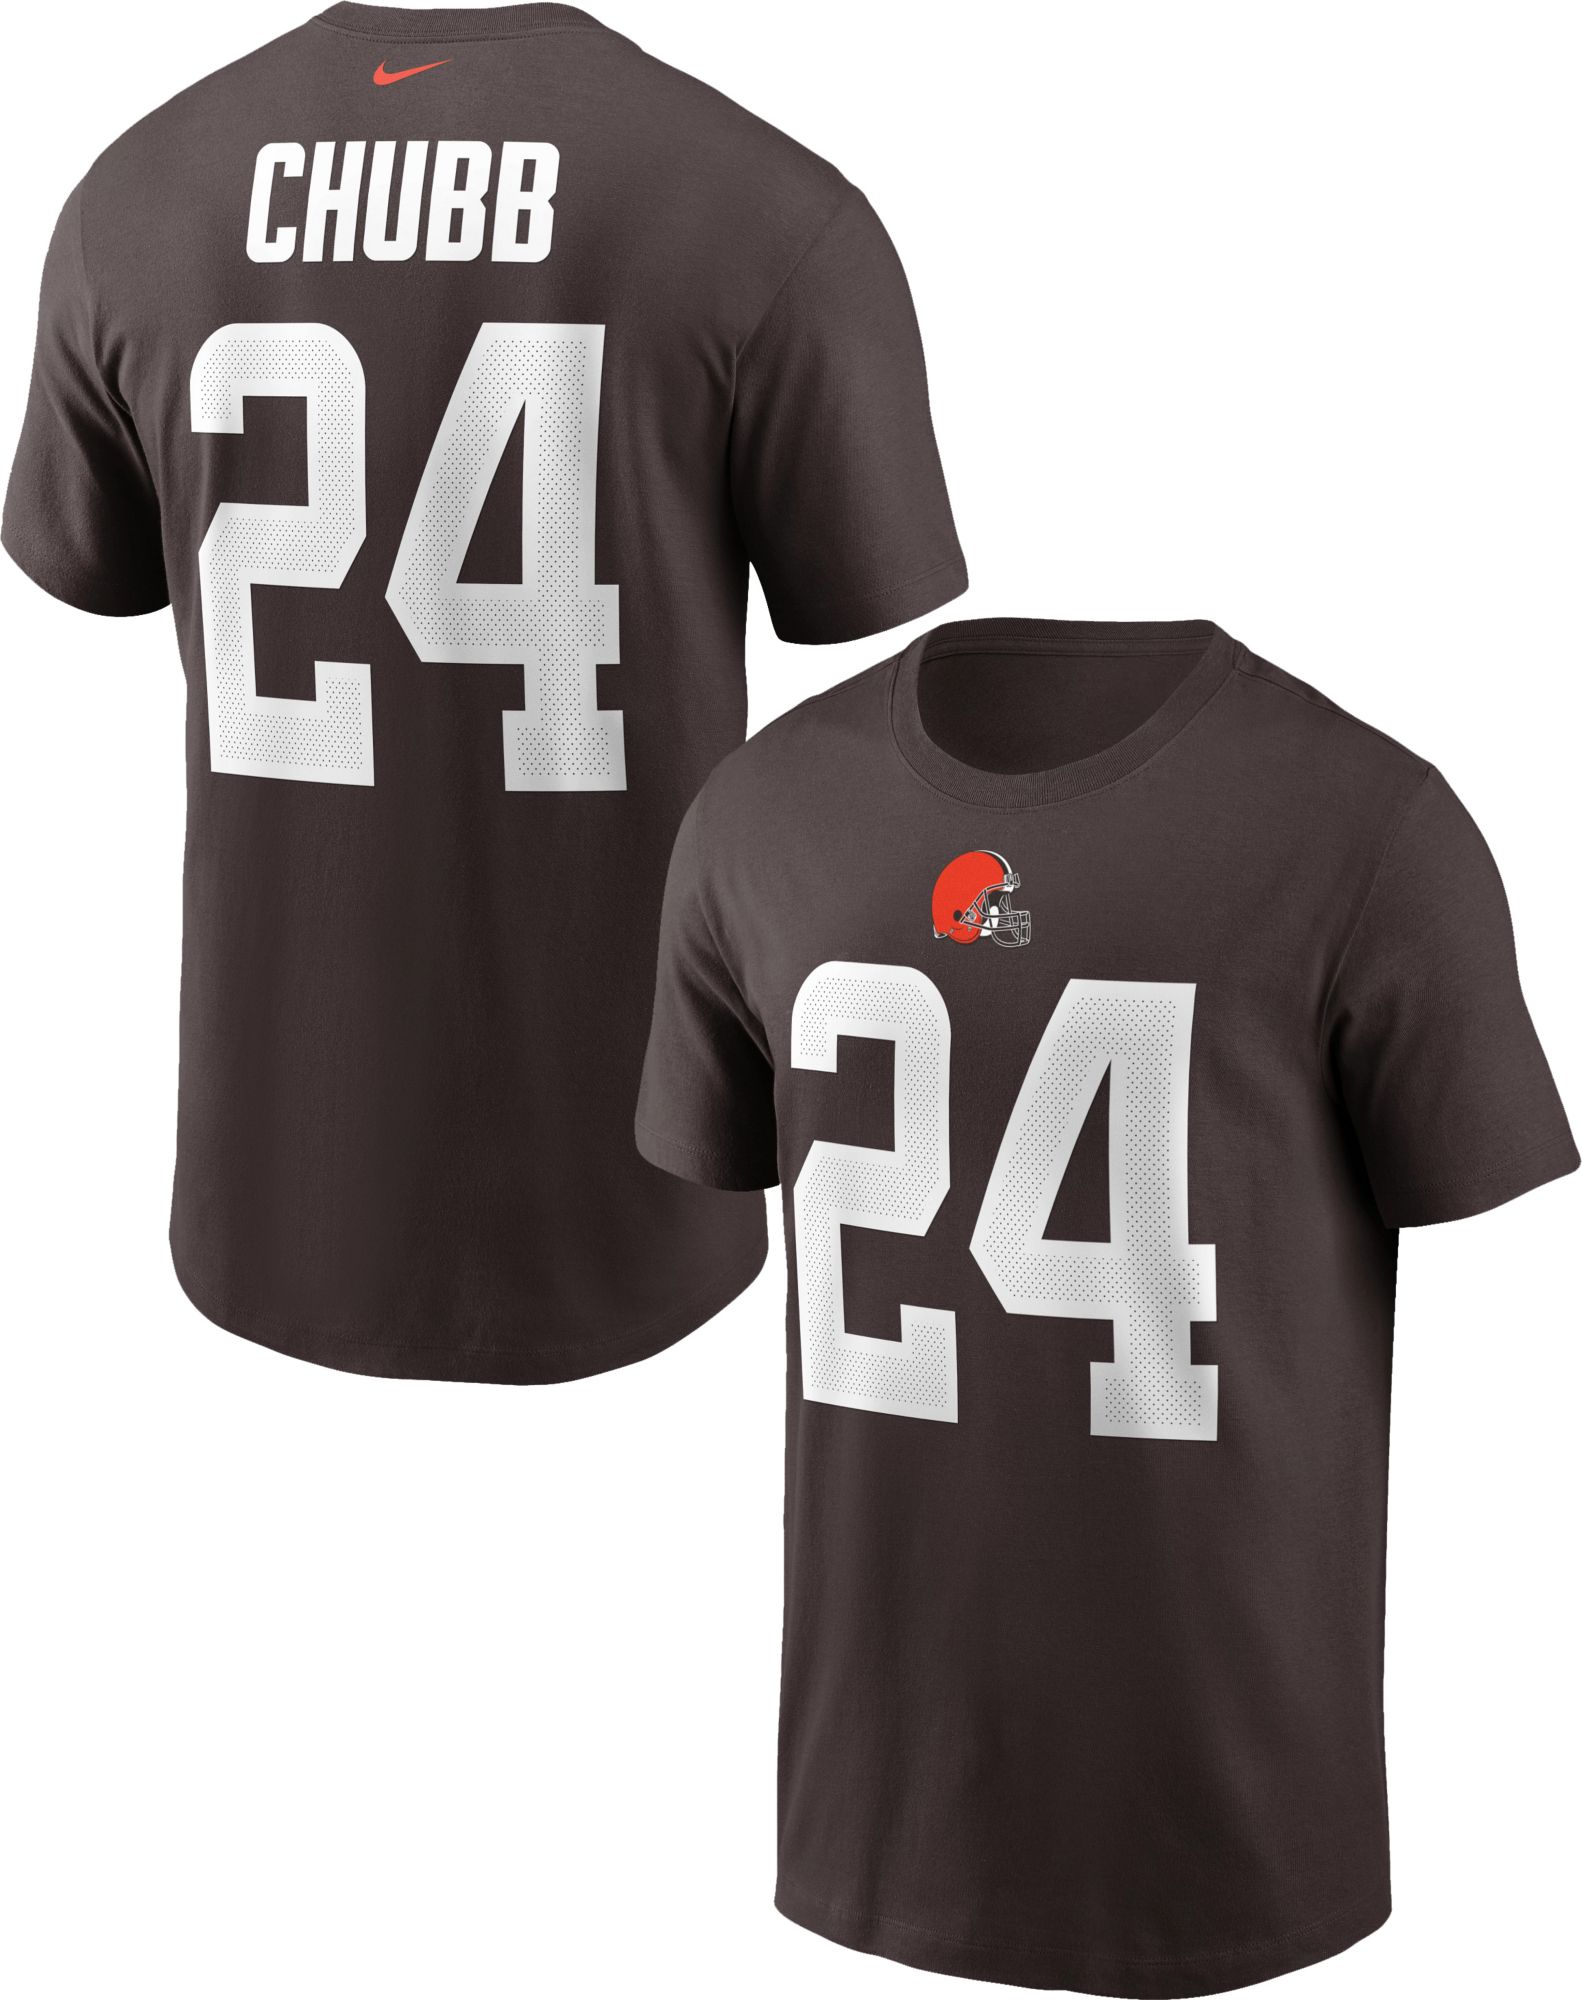 Cleveland Browns No24 Nick Chubb Brown Vapor Limited City Edition Jersey